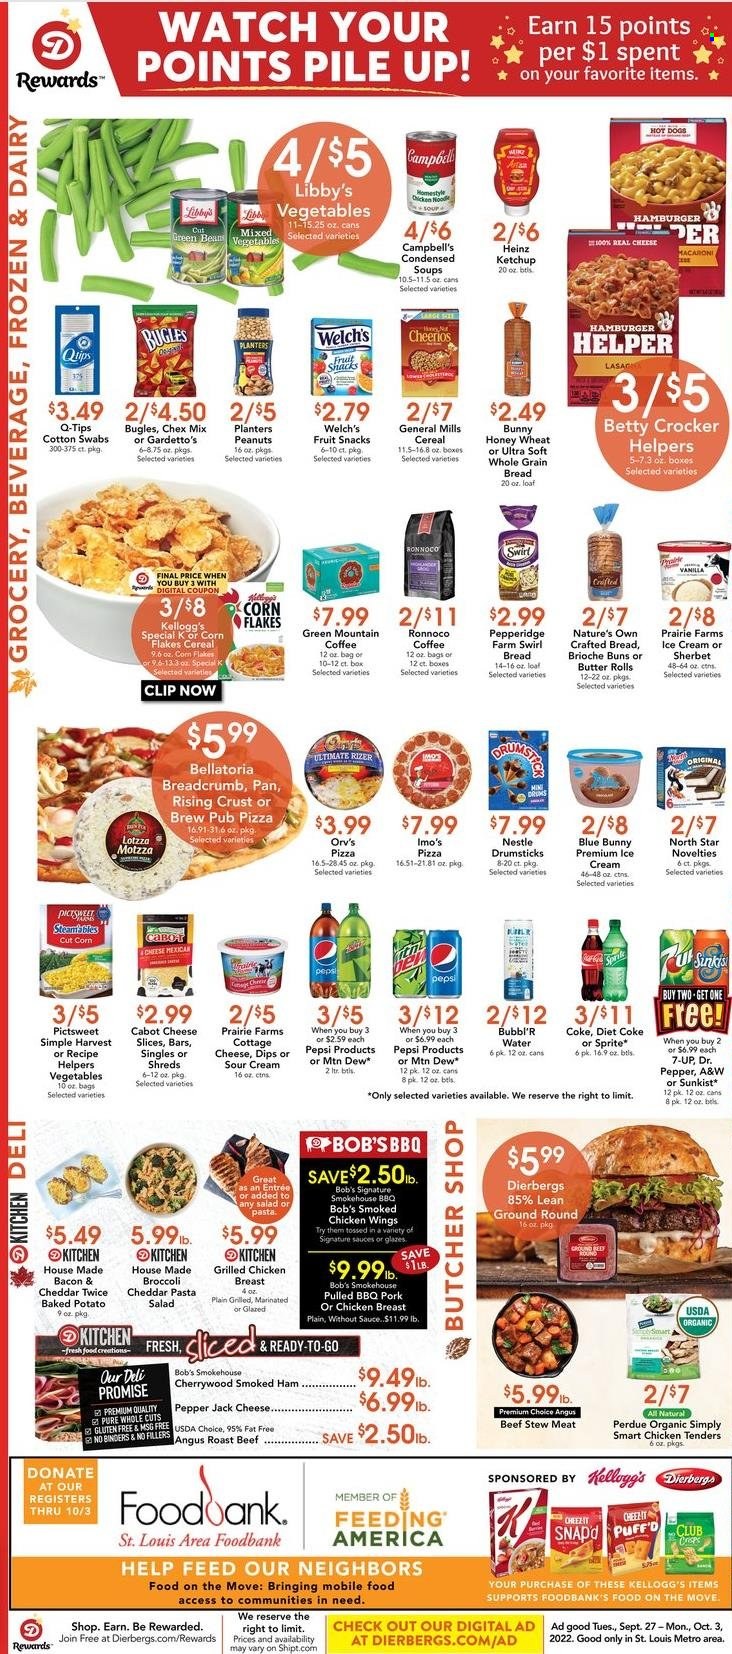 thumbnail - Dierbergs Flyer - 09/27/2022 - 10/03/2022 - Sales products - stew meat, buns, brioche, broccoli, green beans, Welch's, Campbell's, hot dog, pizza, chicken tenders, macaroni, soup, noodles cup, noodles, Perdue®, bacon, ham, smoked ham, pasta salad, cottage cheese, sliced cheese, Pepper Jack cheese, butter, sour cream, ice cream, sherbet, Blue Bunny, Bellatoria, Nestlé, Kellogg's, fruit snack, Chex Mix, Heinz, cereals, Cheerios, corn flakes, ketchup, peanuts, Planters, Coca-Cola, Mountain Dew, Sprite, Pepsi, Dr. Pepper, Diet Coke, 7UP, A&W, coffee, Green Mountain, chicken breasts, beef meat, ground beef, roast beef, Nature's Own. Page 4.